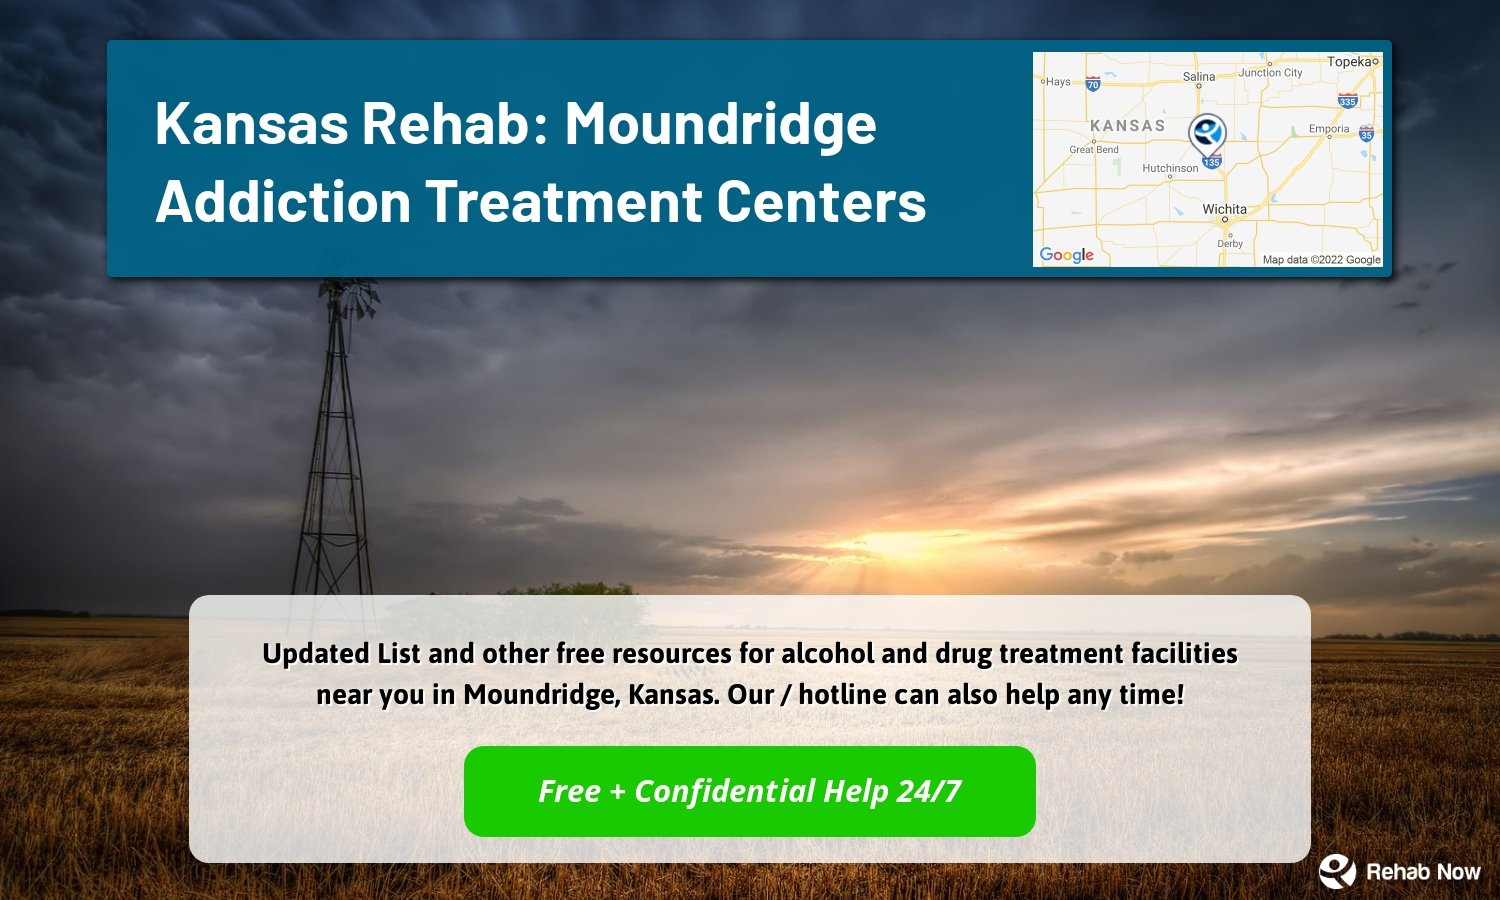  Updated List and other free resources for alcohol and drug treatment facilities near you in Moundridge, Kansas. Our / hotline can also help any time!